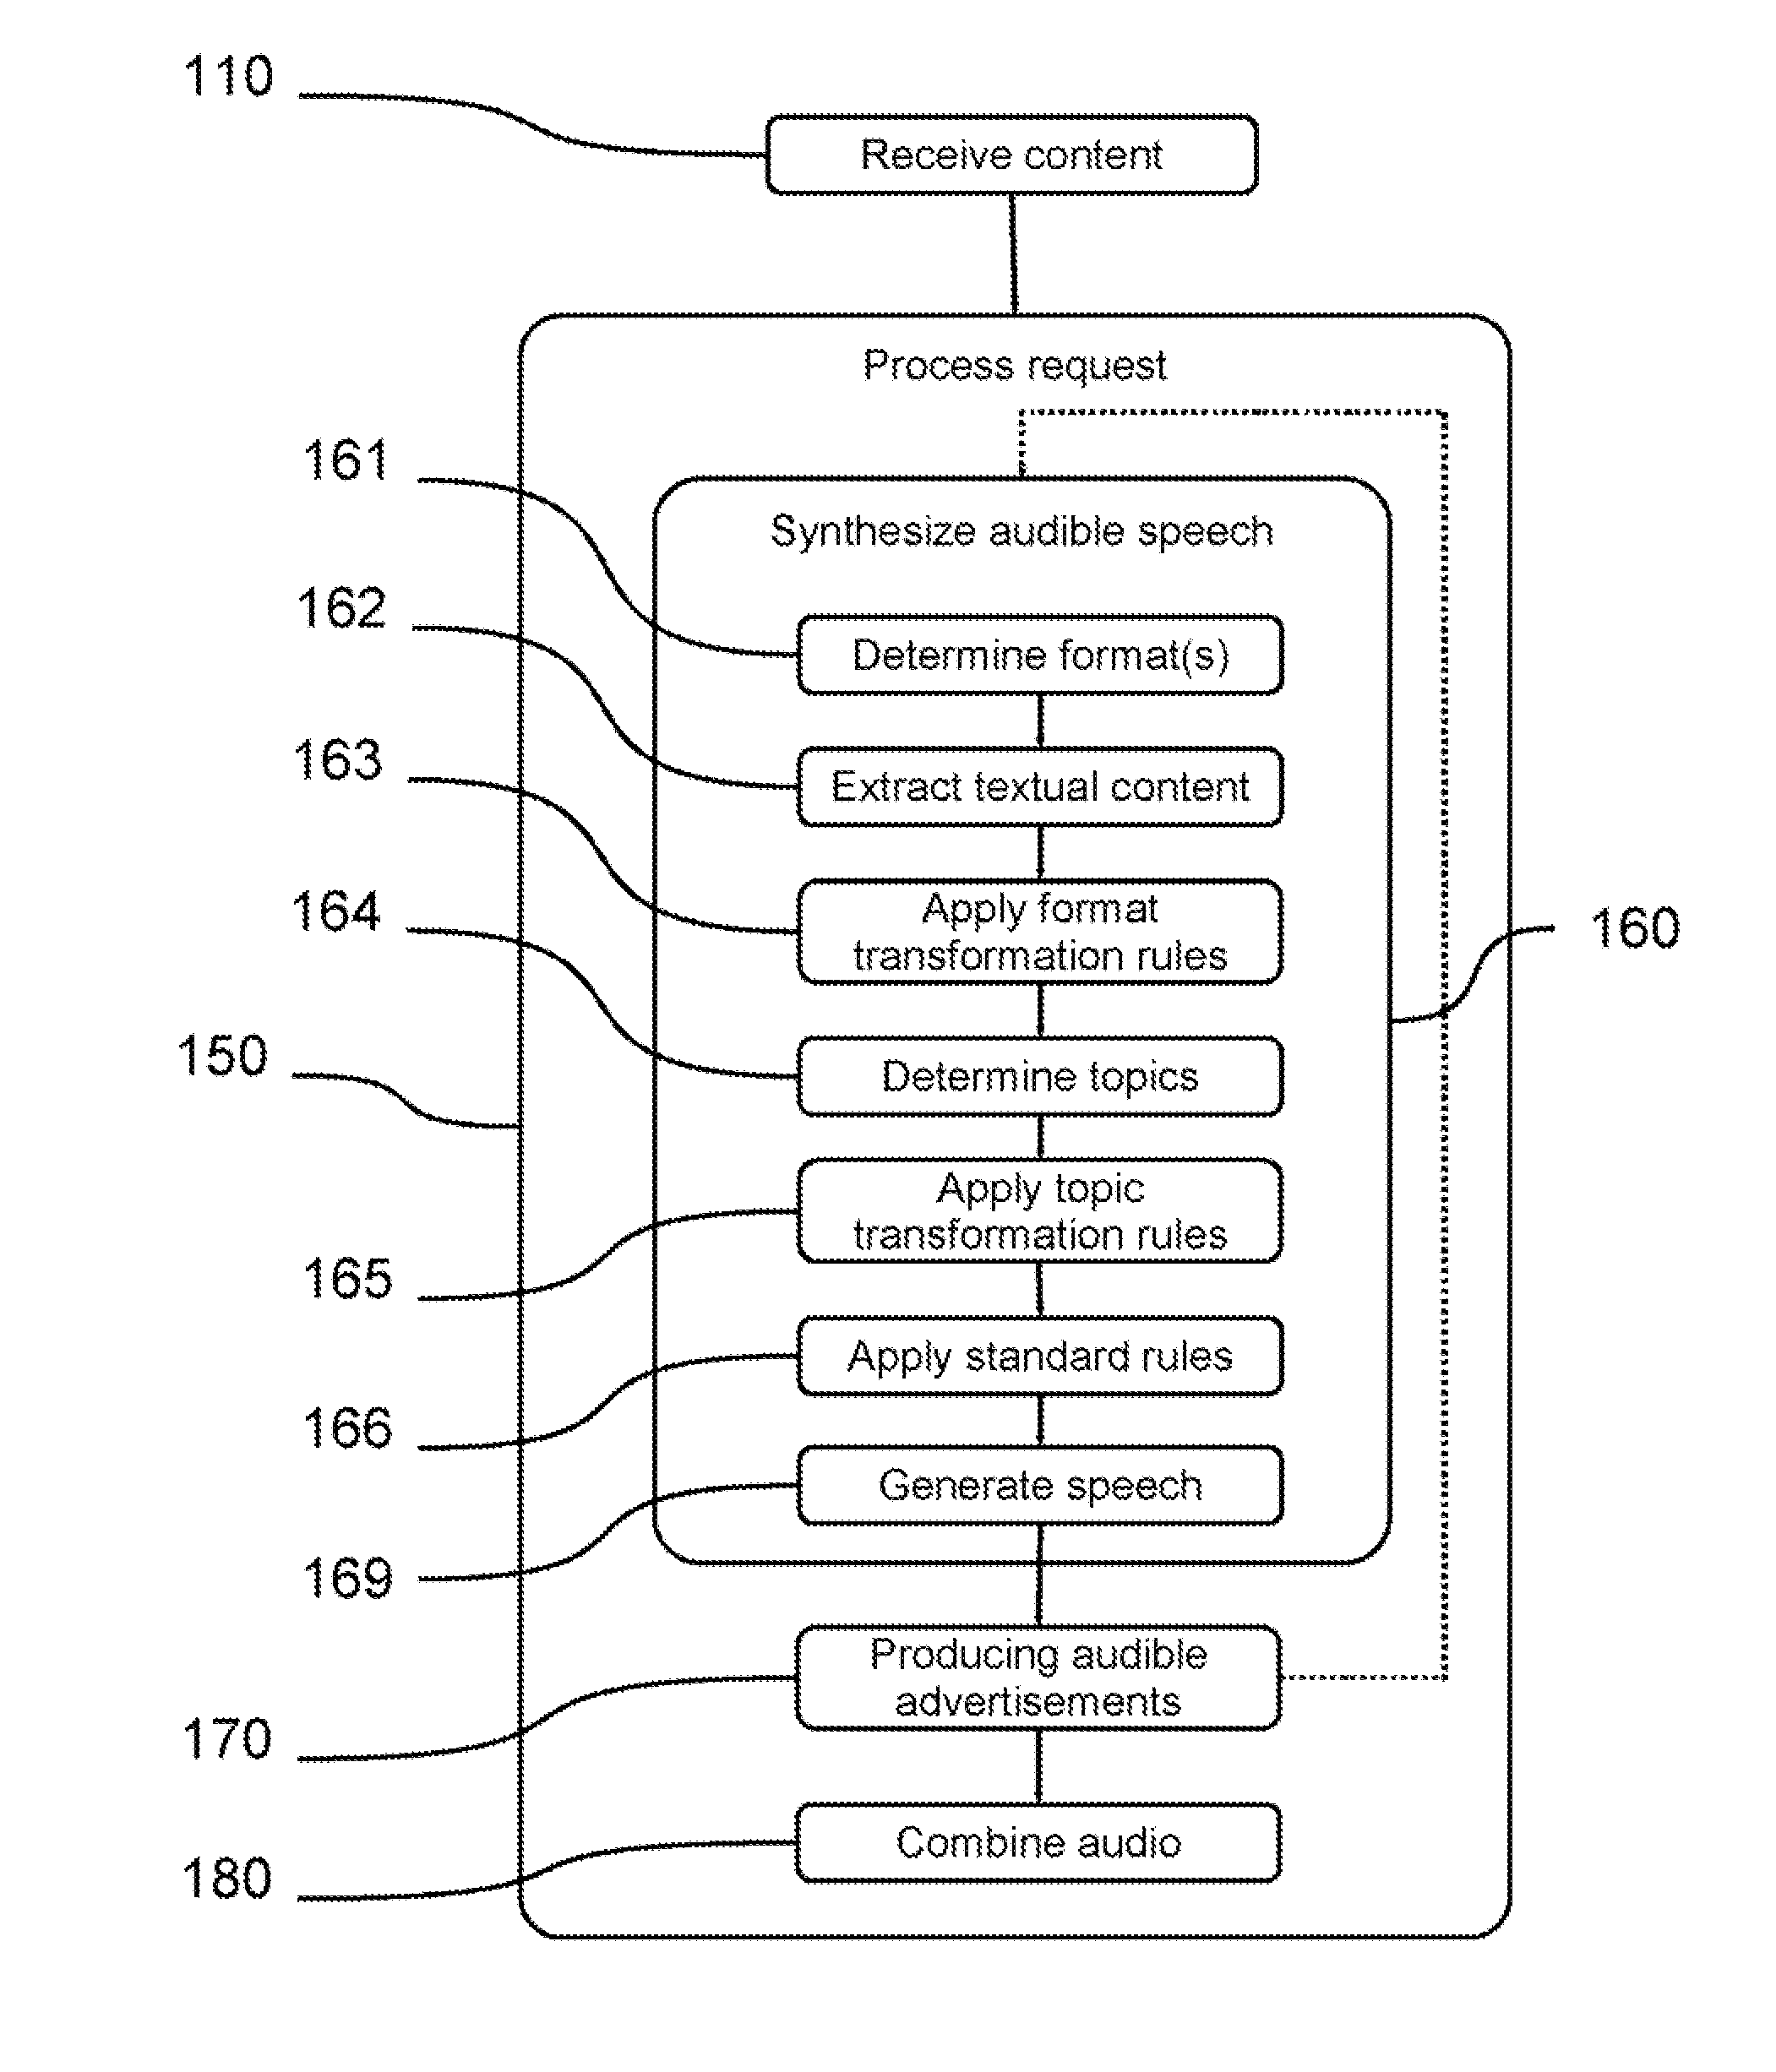 Method and System for a Speech Synthesis and Advertising Service